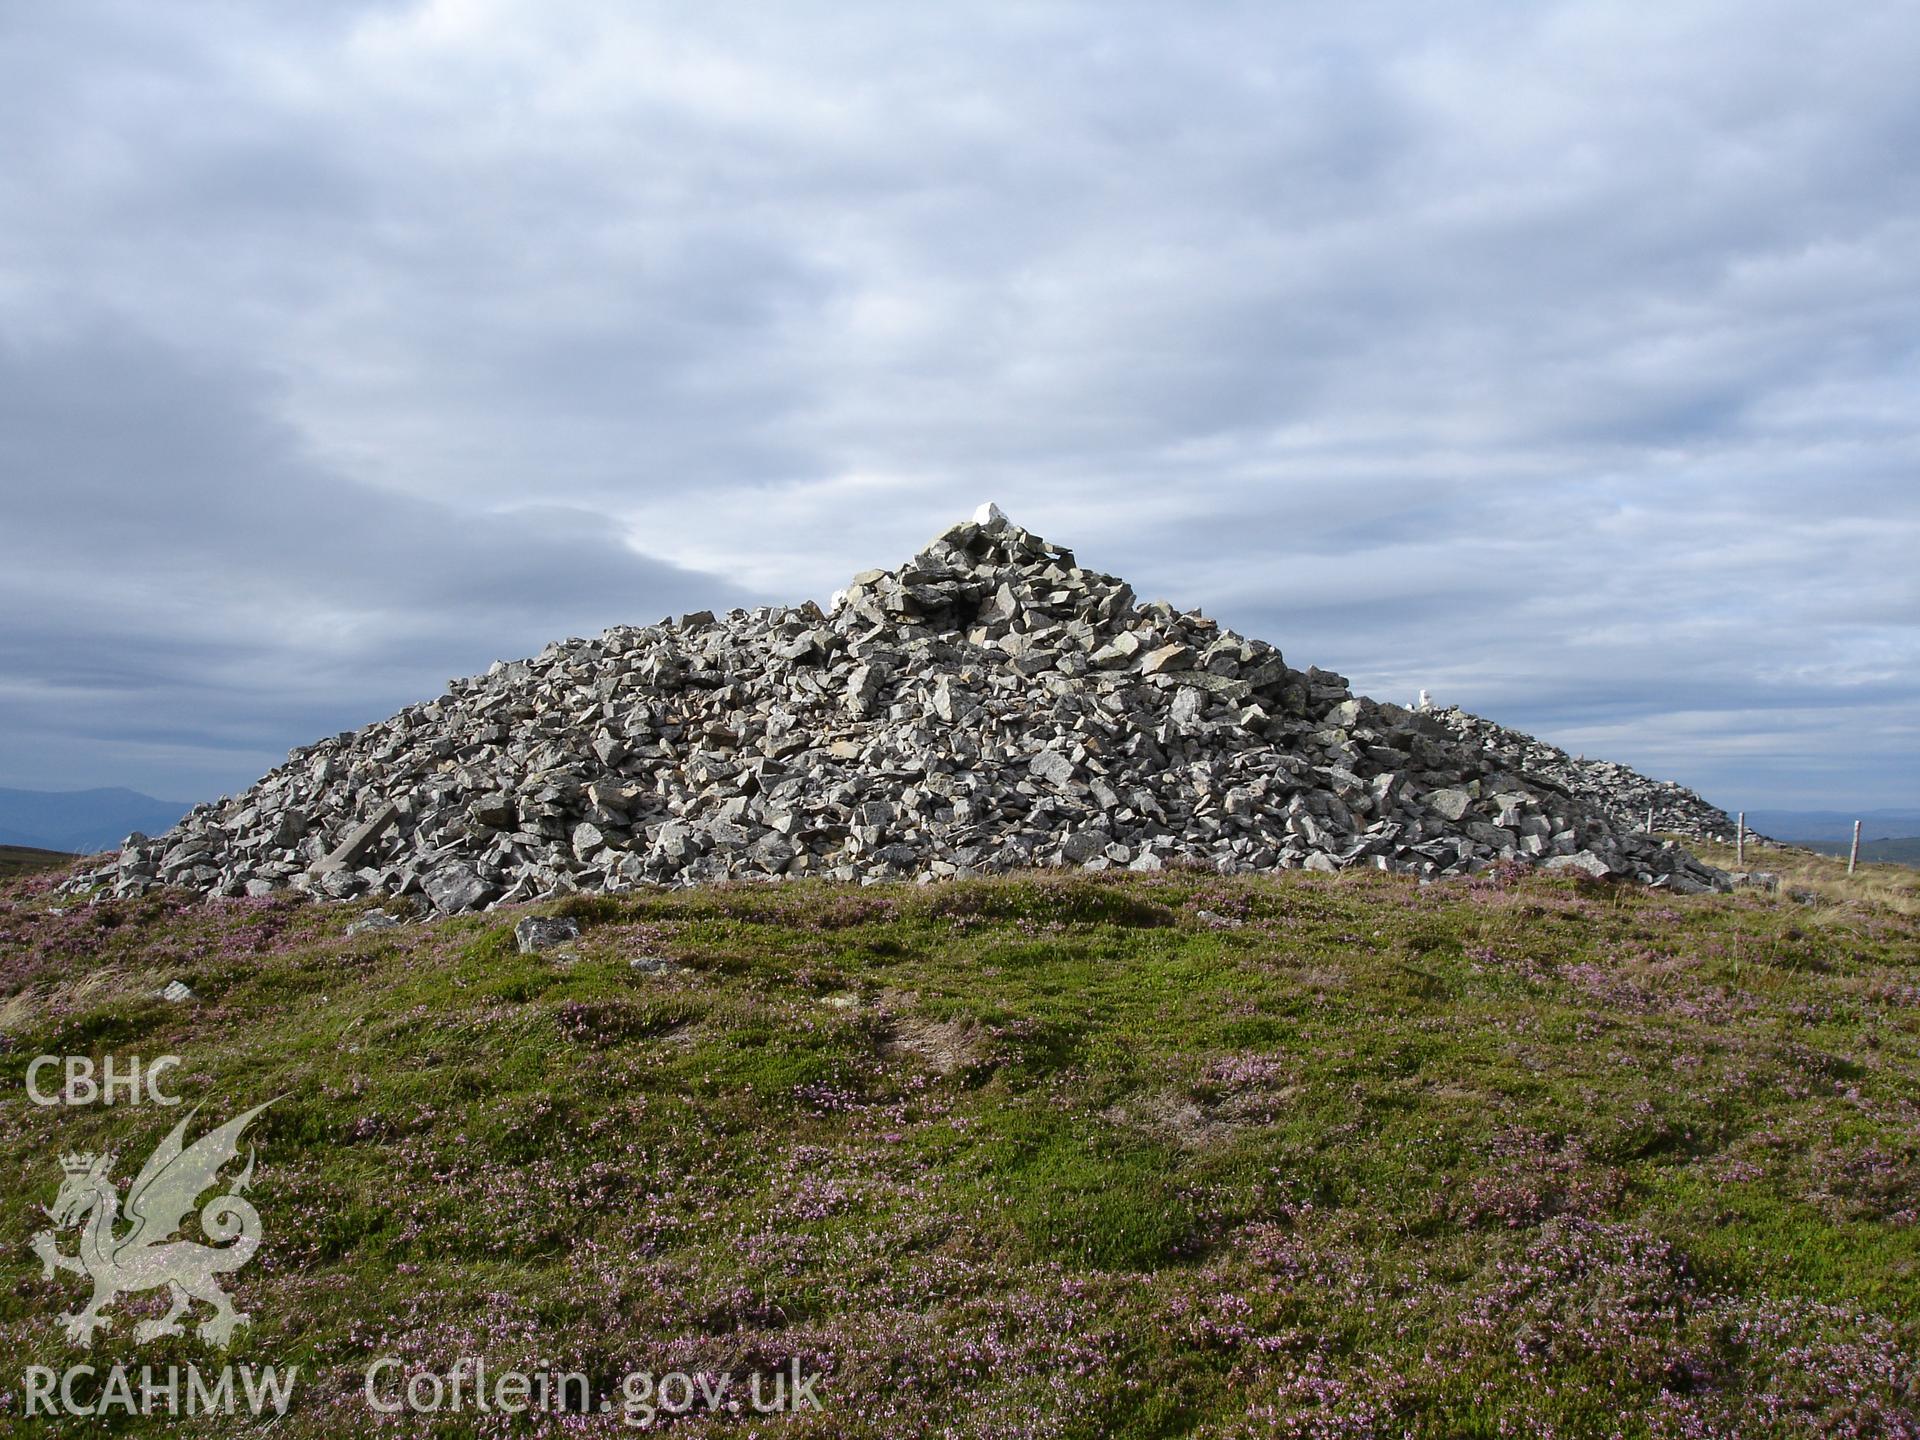 Digital colour photograph of Carn Biga Cairn I taken on 08/08/2006 by R.P. Sambrook during the Plynlimon Glaslyn South Upland survey undertaken by Trysor.